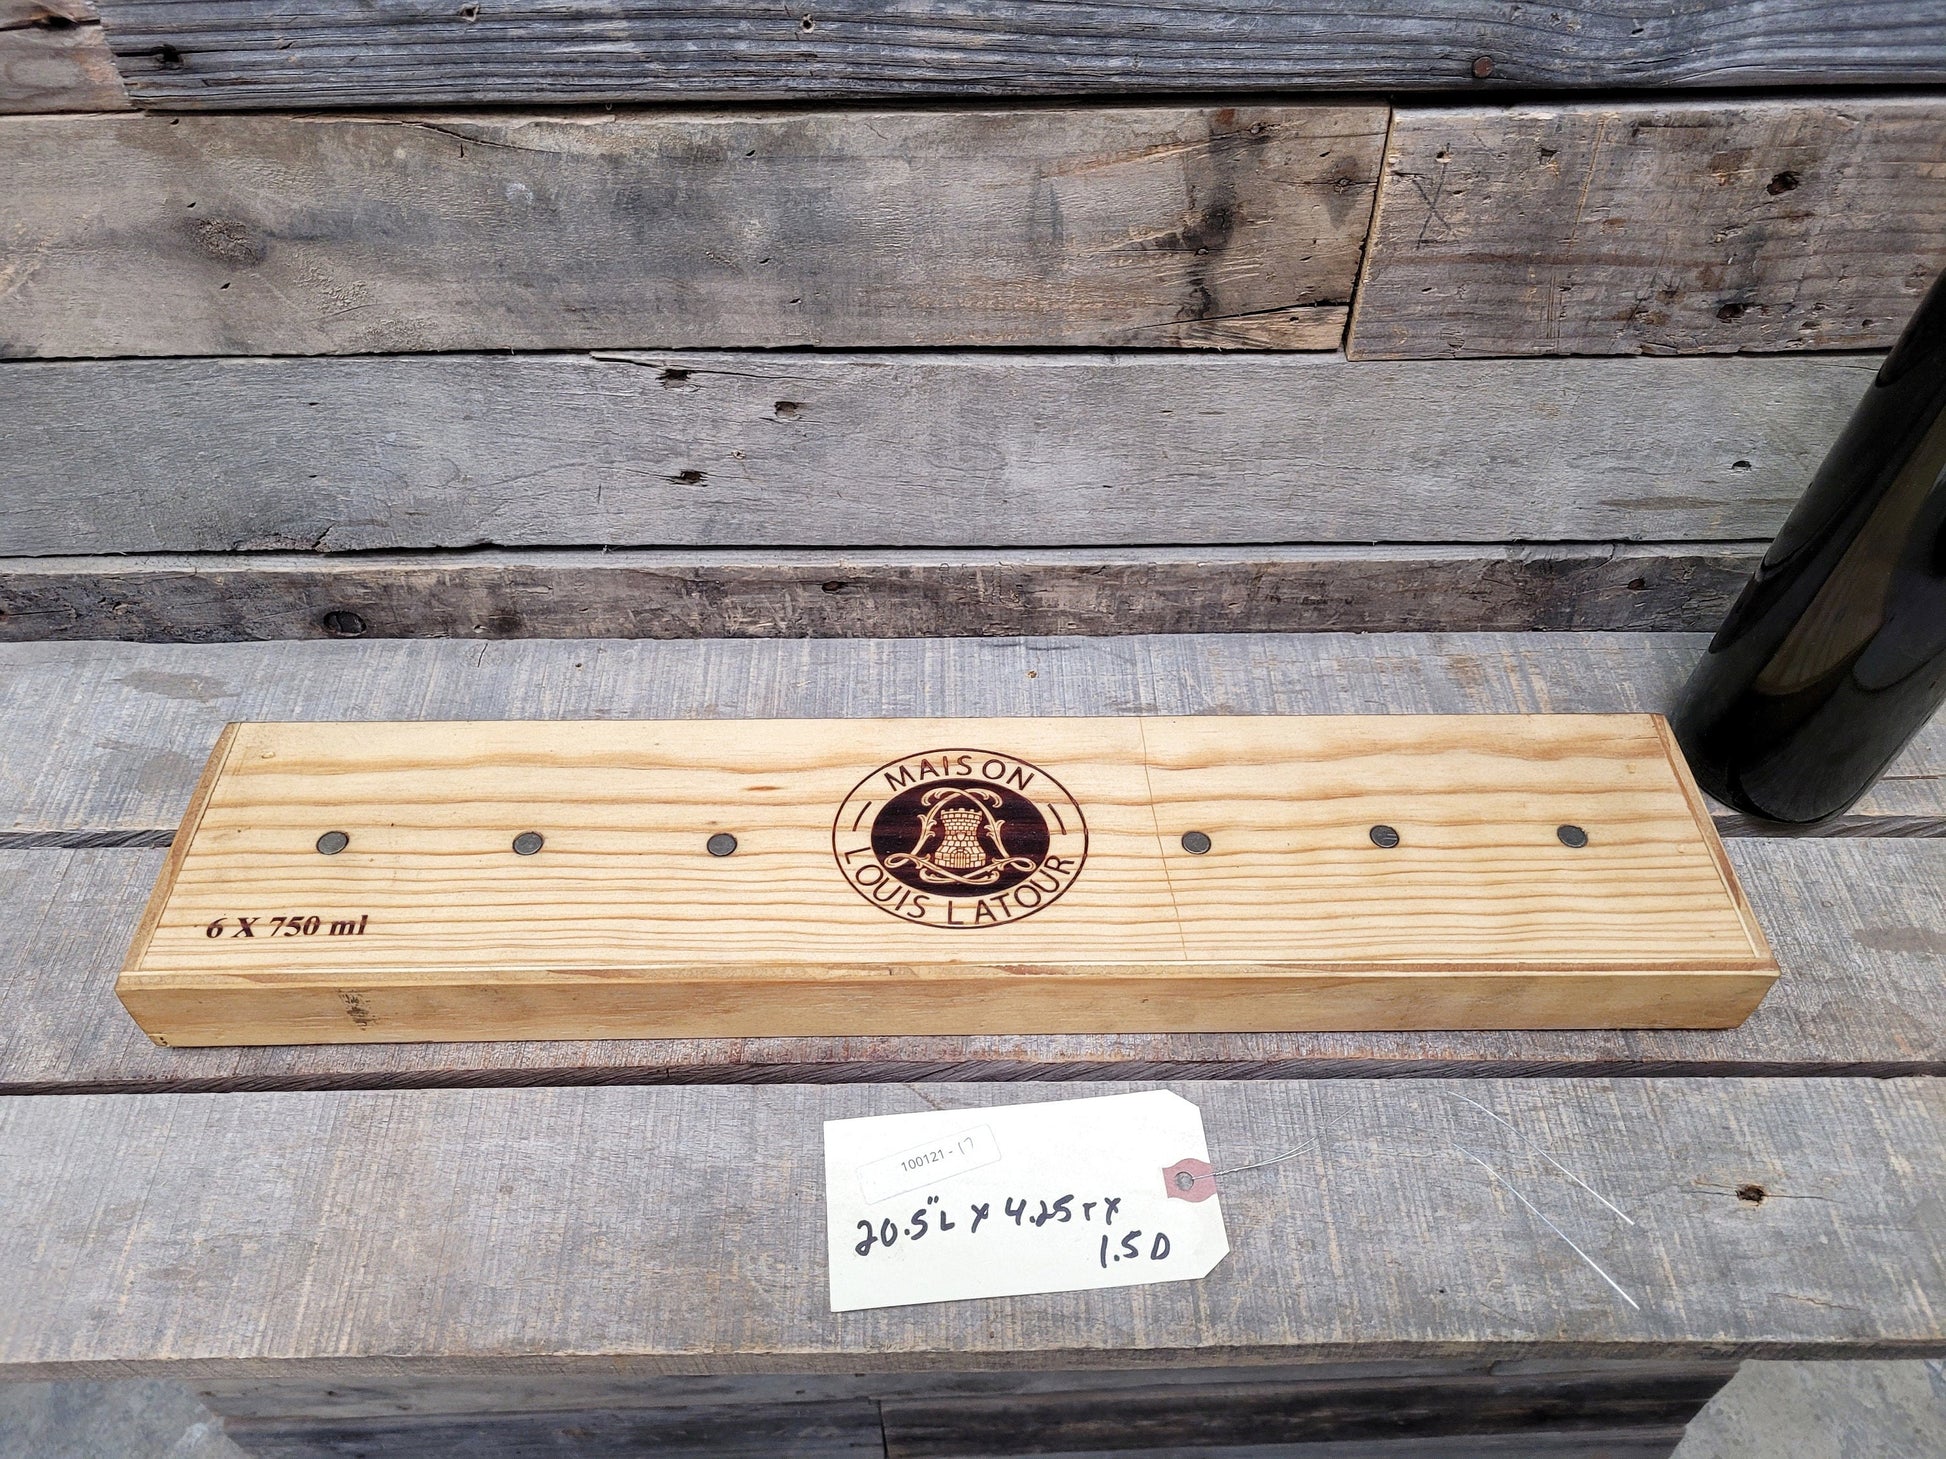 Magnetic Knife Rack Made from retired Maison Louis Latour Wine Box - 100% Recycled!